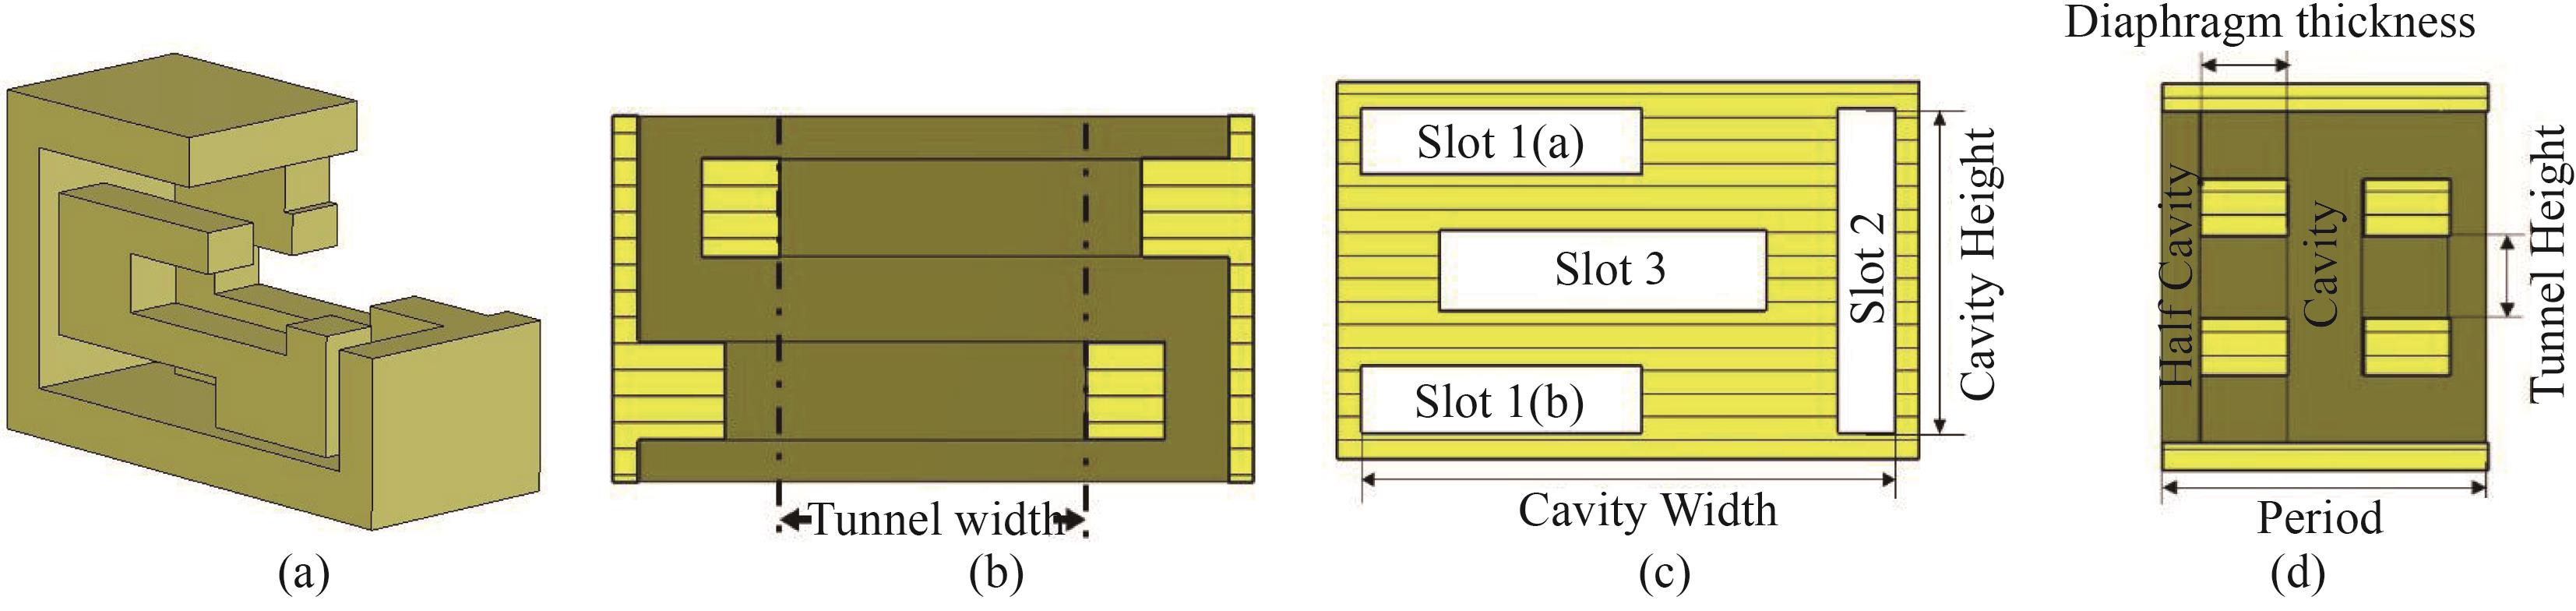 (a) Cut-away isometric view of a 3-D model of a full period (created by stacking two rotated unit cells), (b) the top view, (c) the left view, and (d) the front view of cutting-plane of the full period three-slot SWS